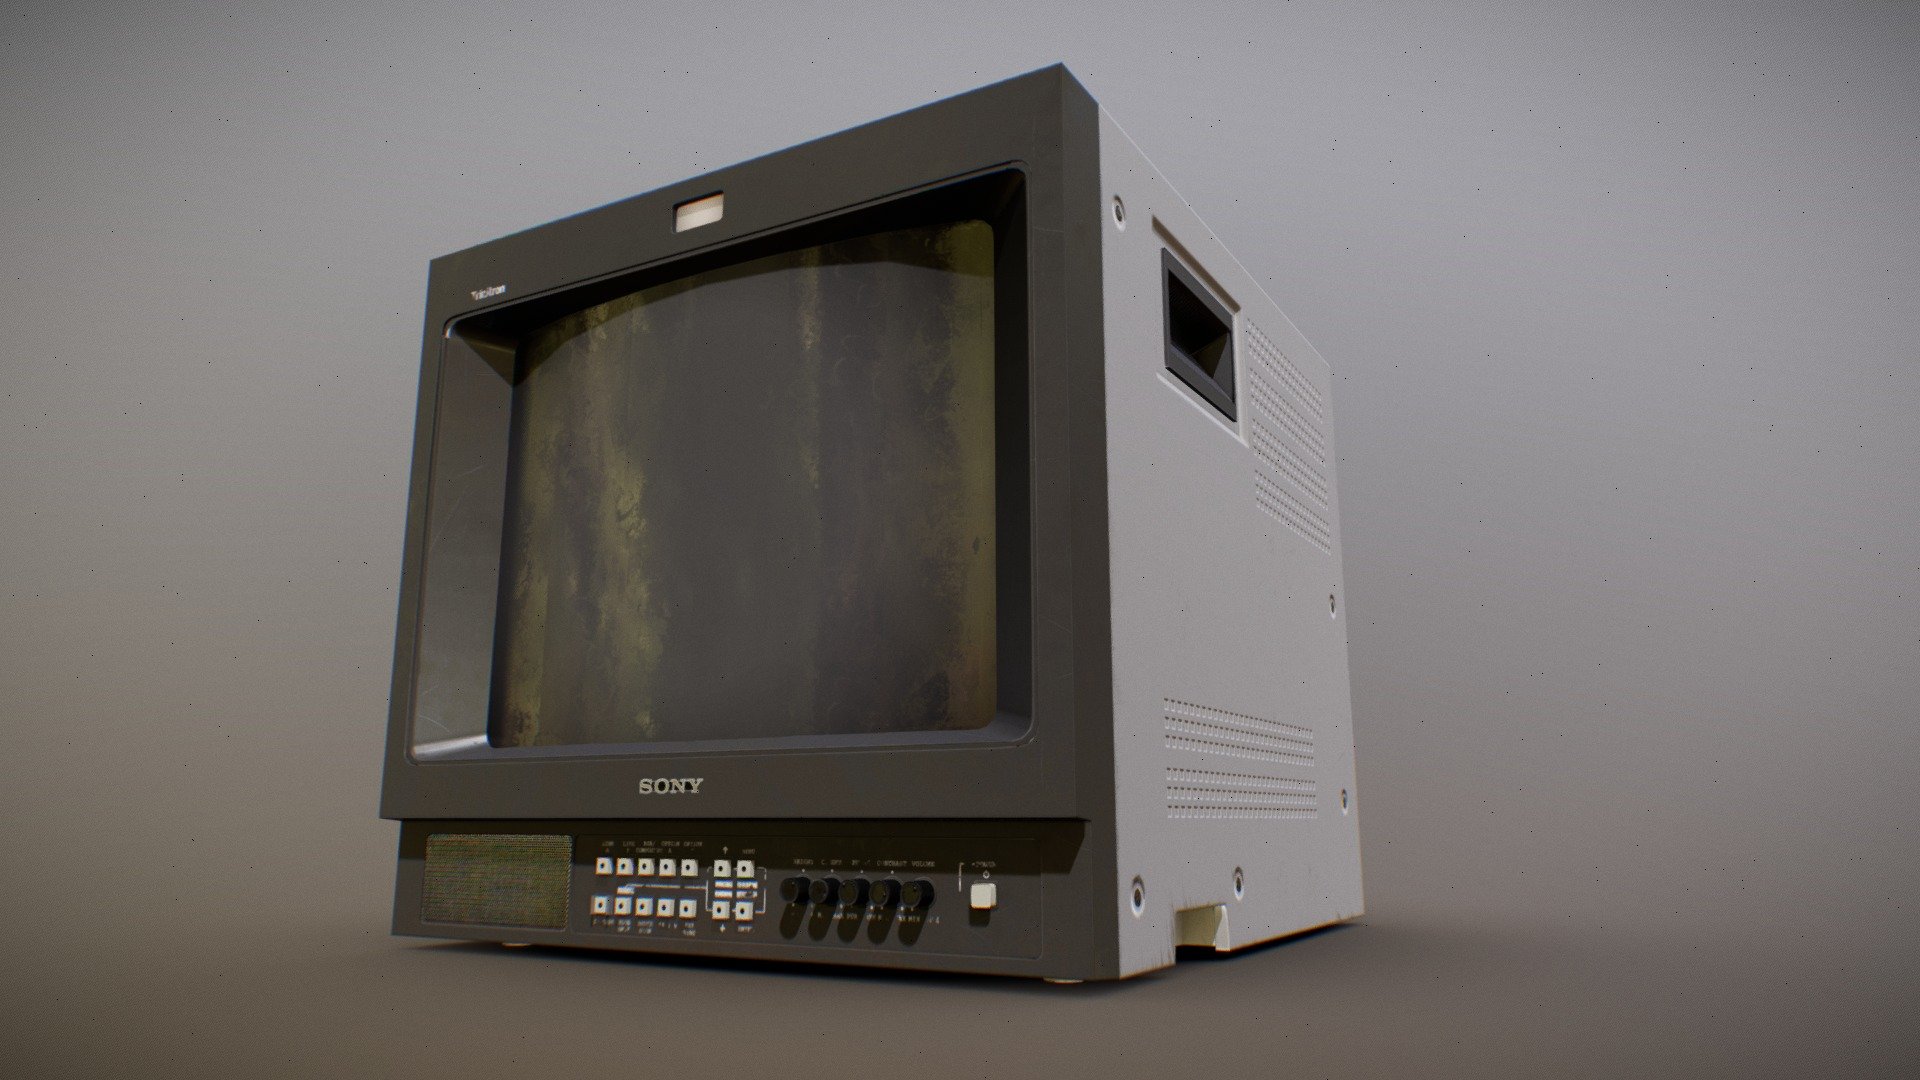 Sony PVM14L2 crt tv model, created in blender, baked in marmoset, and textured in substance - Sony PVM-14L2 CRT TV - Download Free 3D model by Poring 3d model